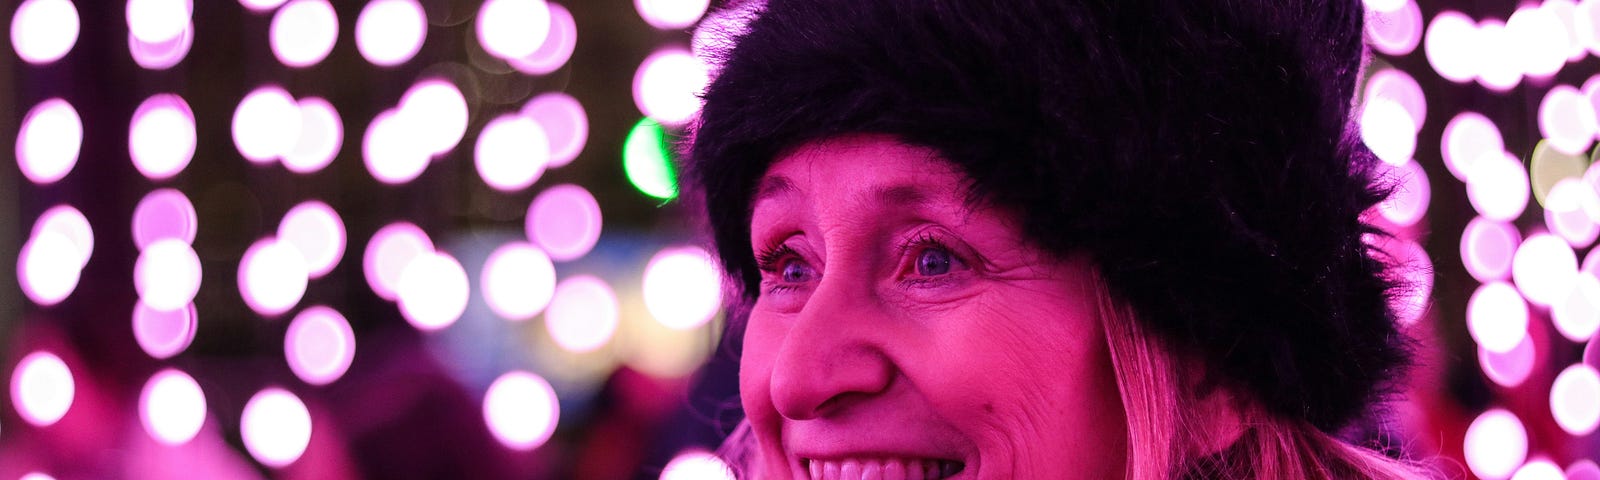 A woman brightly smiles in lights